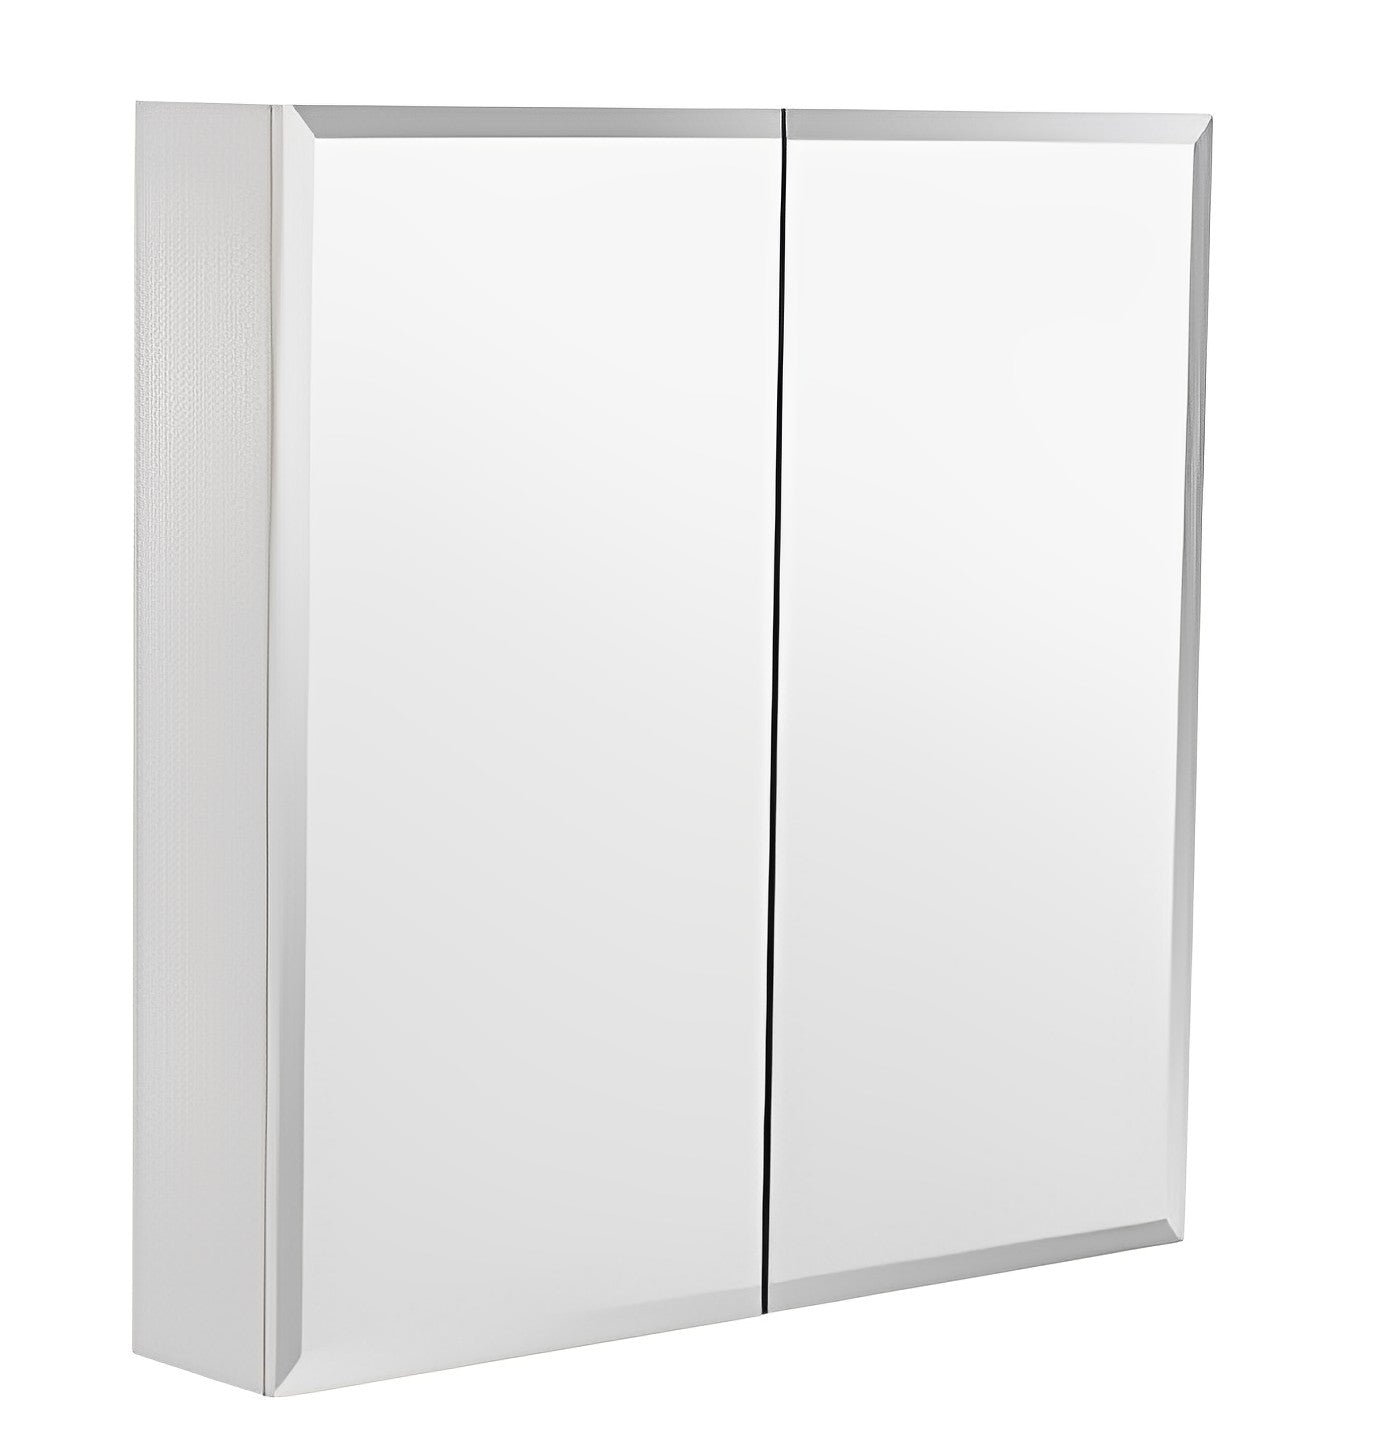 POSEIDON MBSV MIRROR CABINET (AVAILABLE IN 600MM, 750MM AND 900MM)